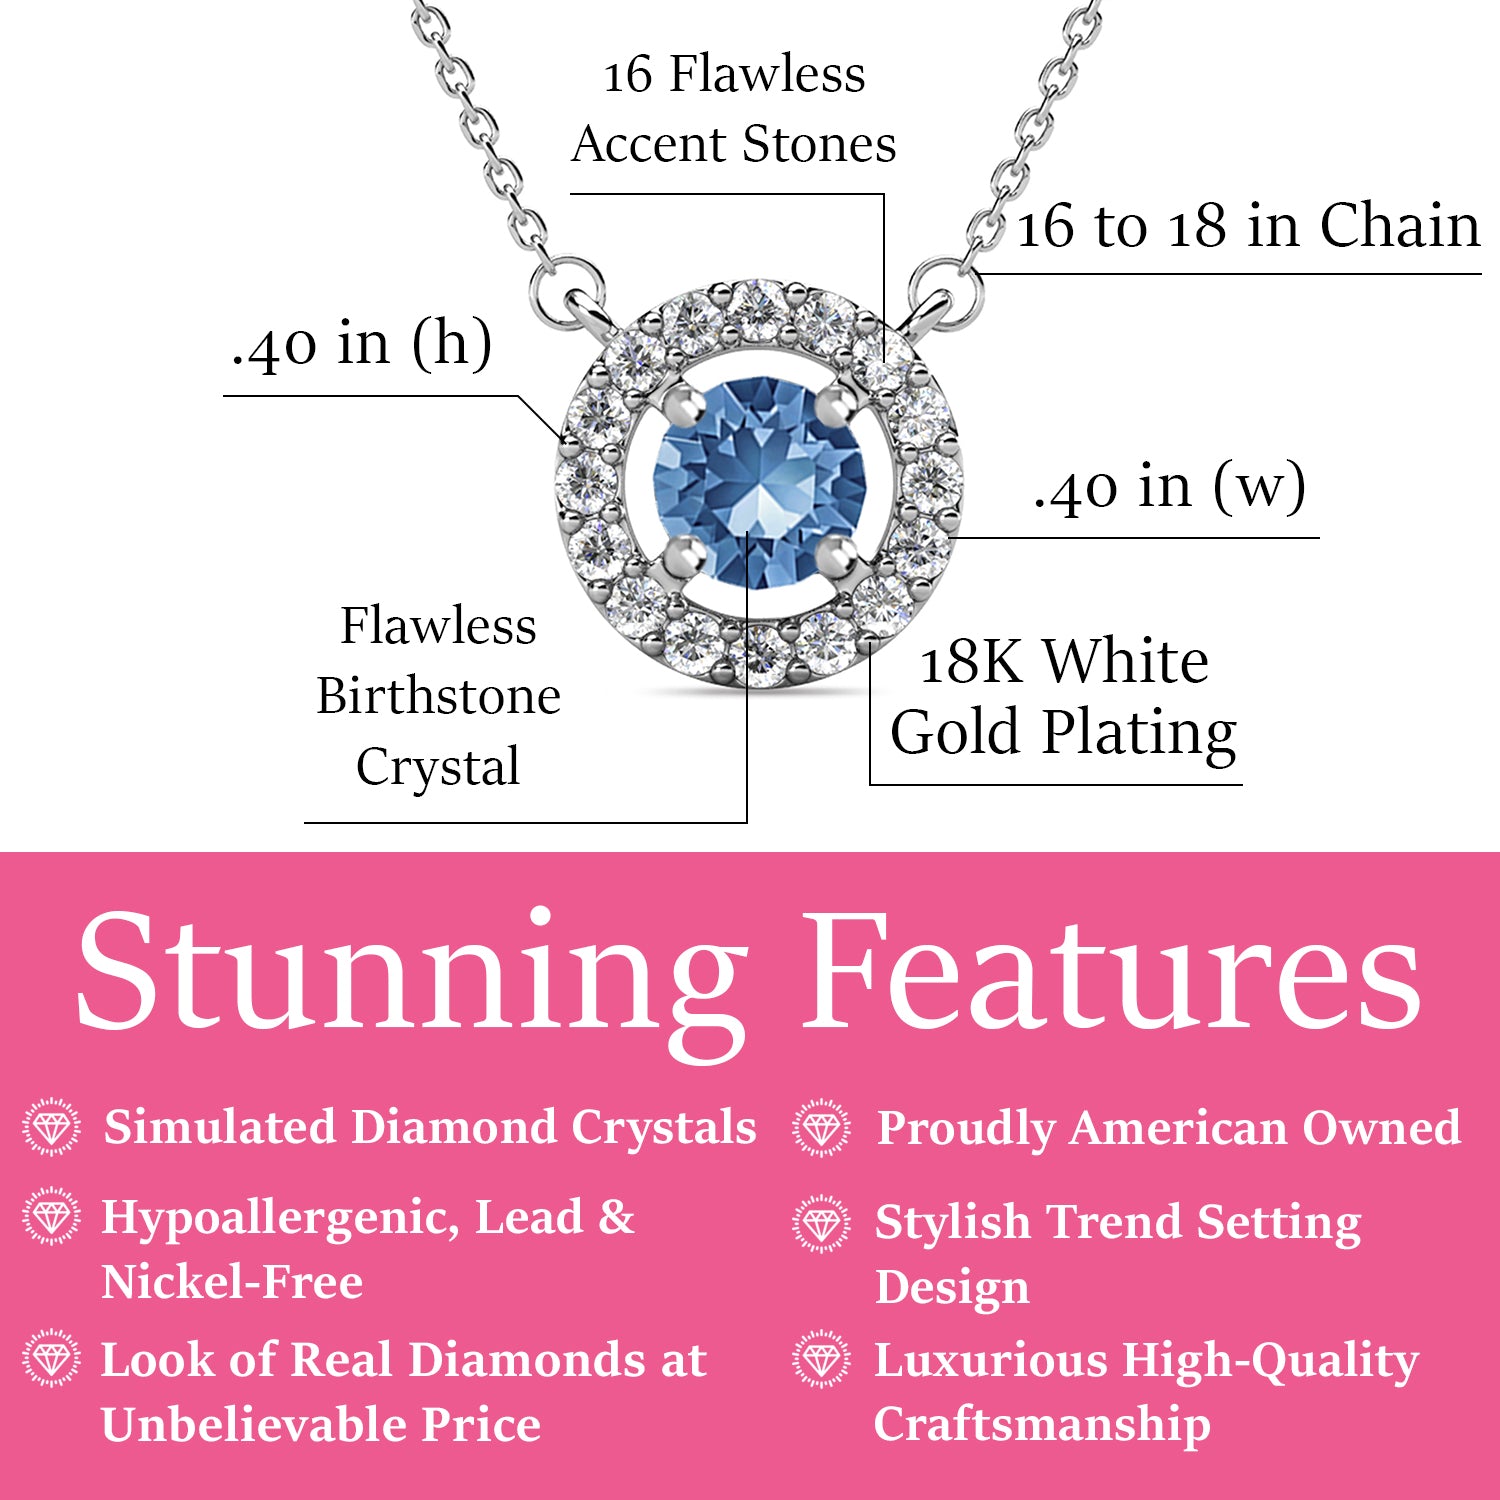 Royal 18k White Gold Plated Birthstone Halo Necklace with Round Cut Crystals